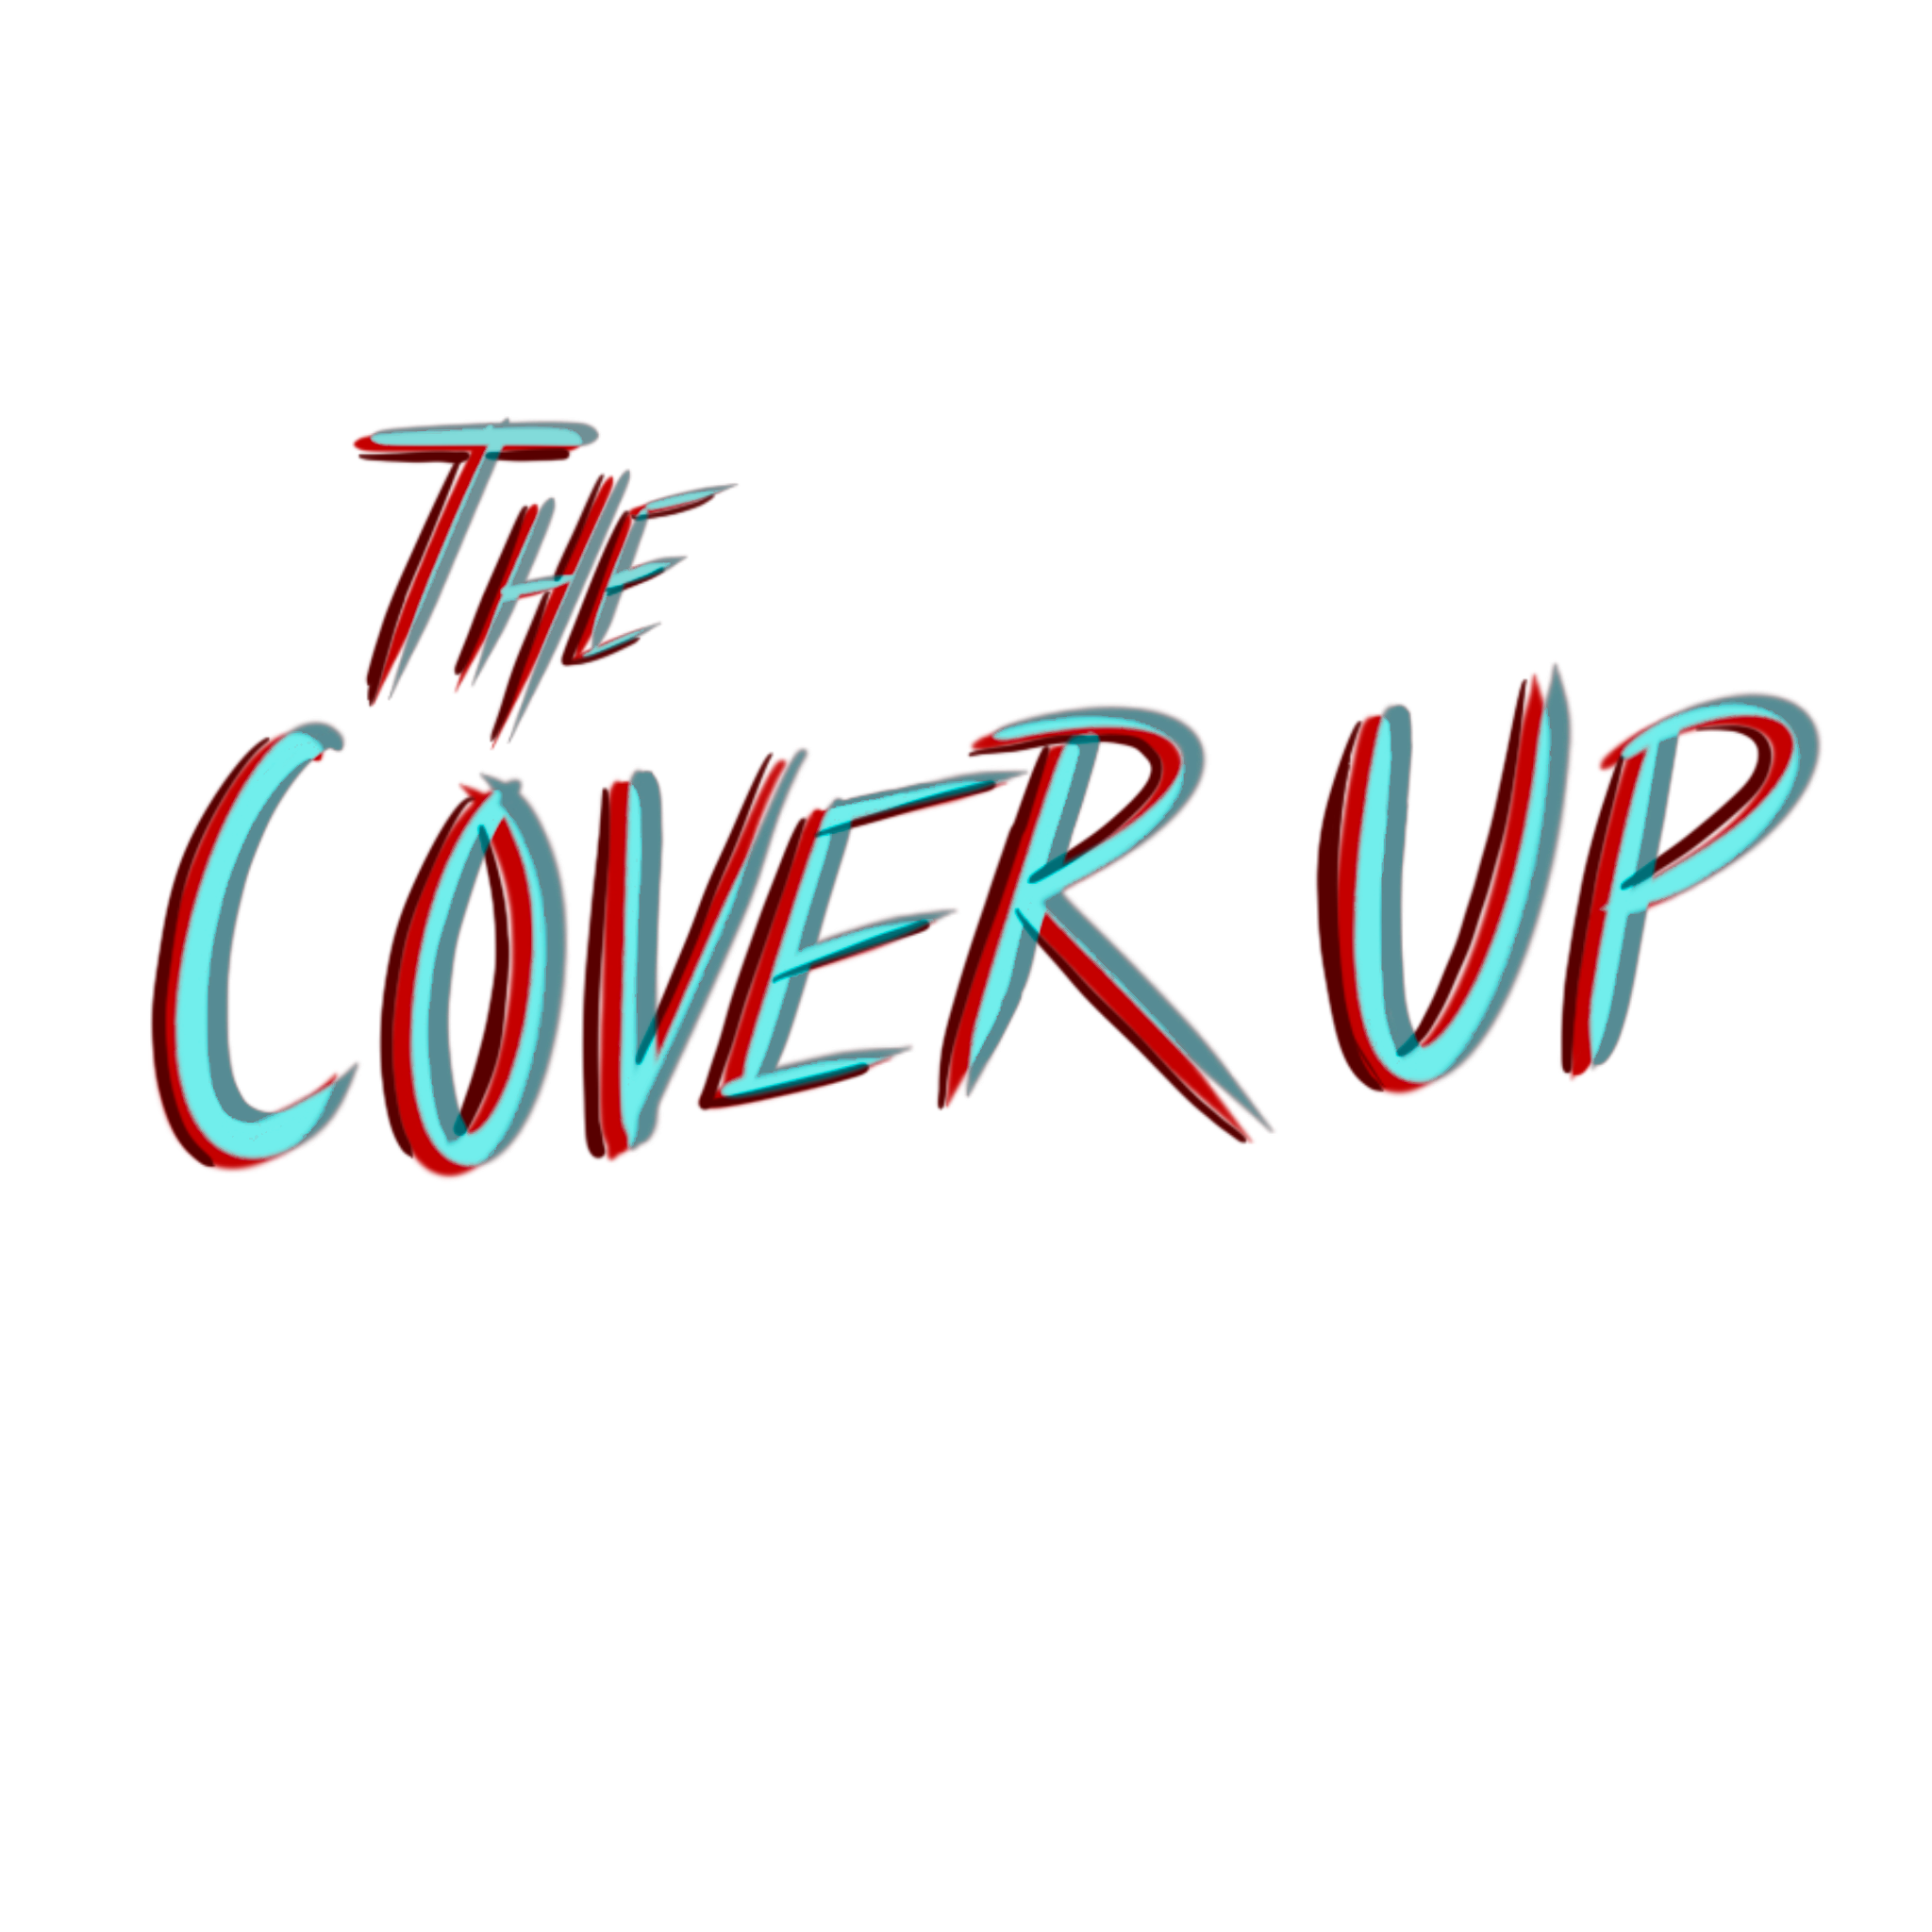 The Cover Up